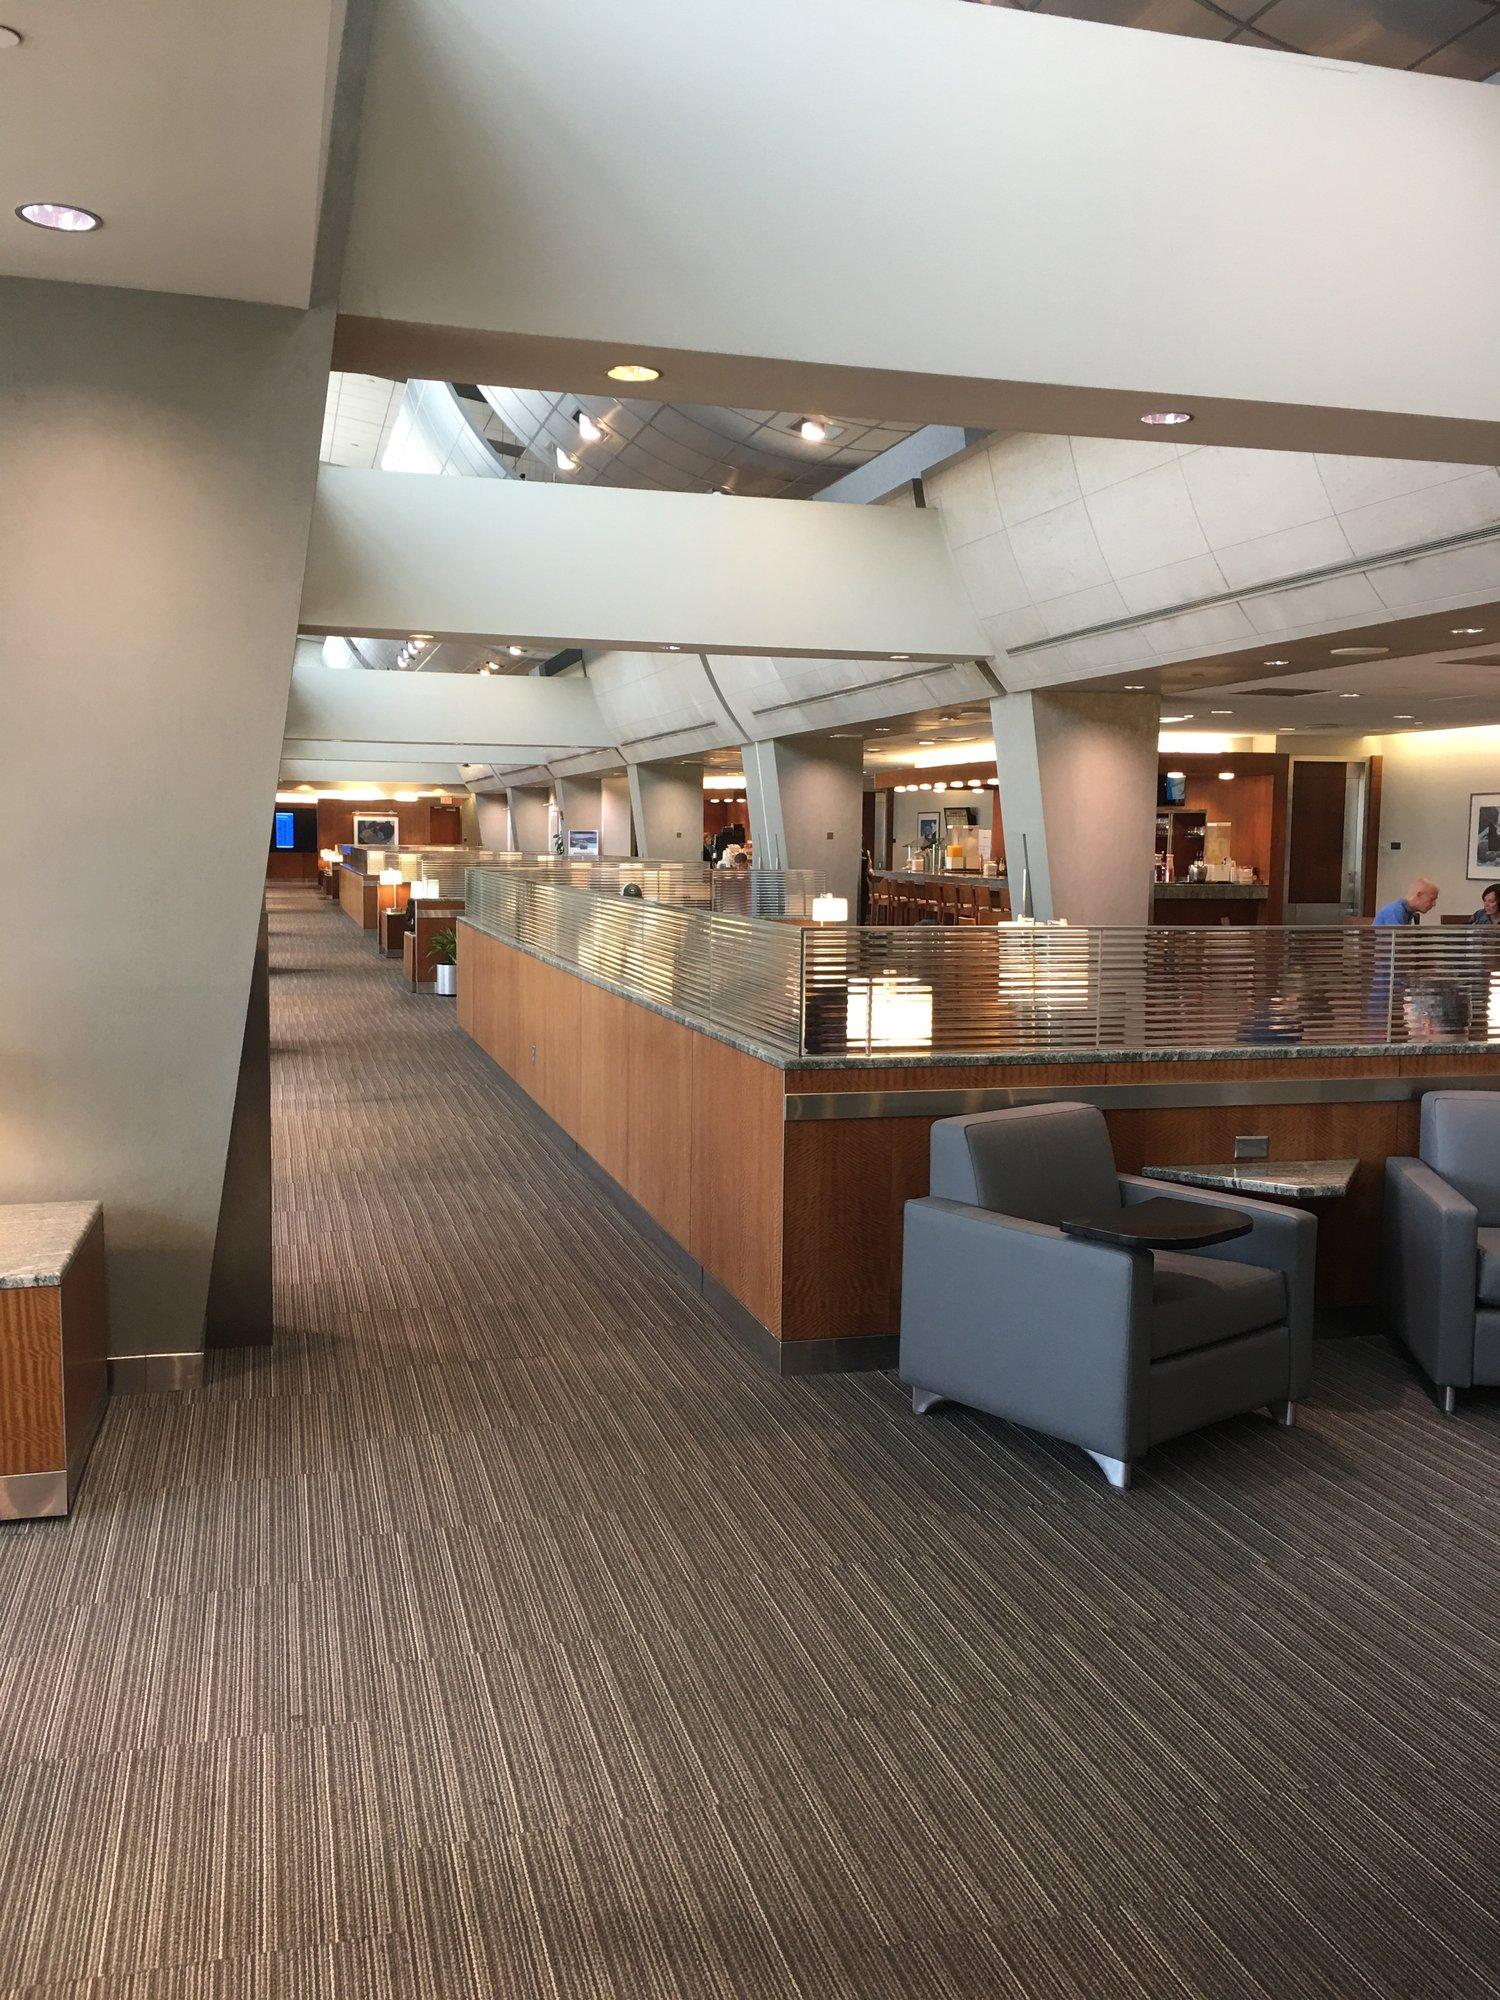 American Airlines Admirals Club image 22 of 48